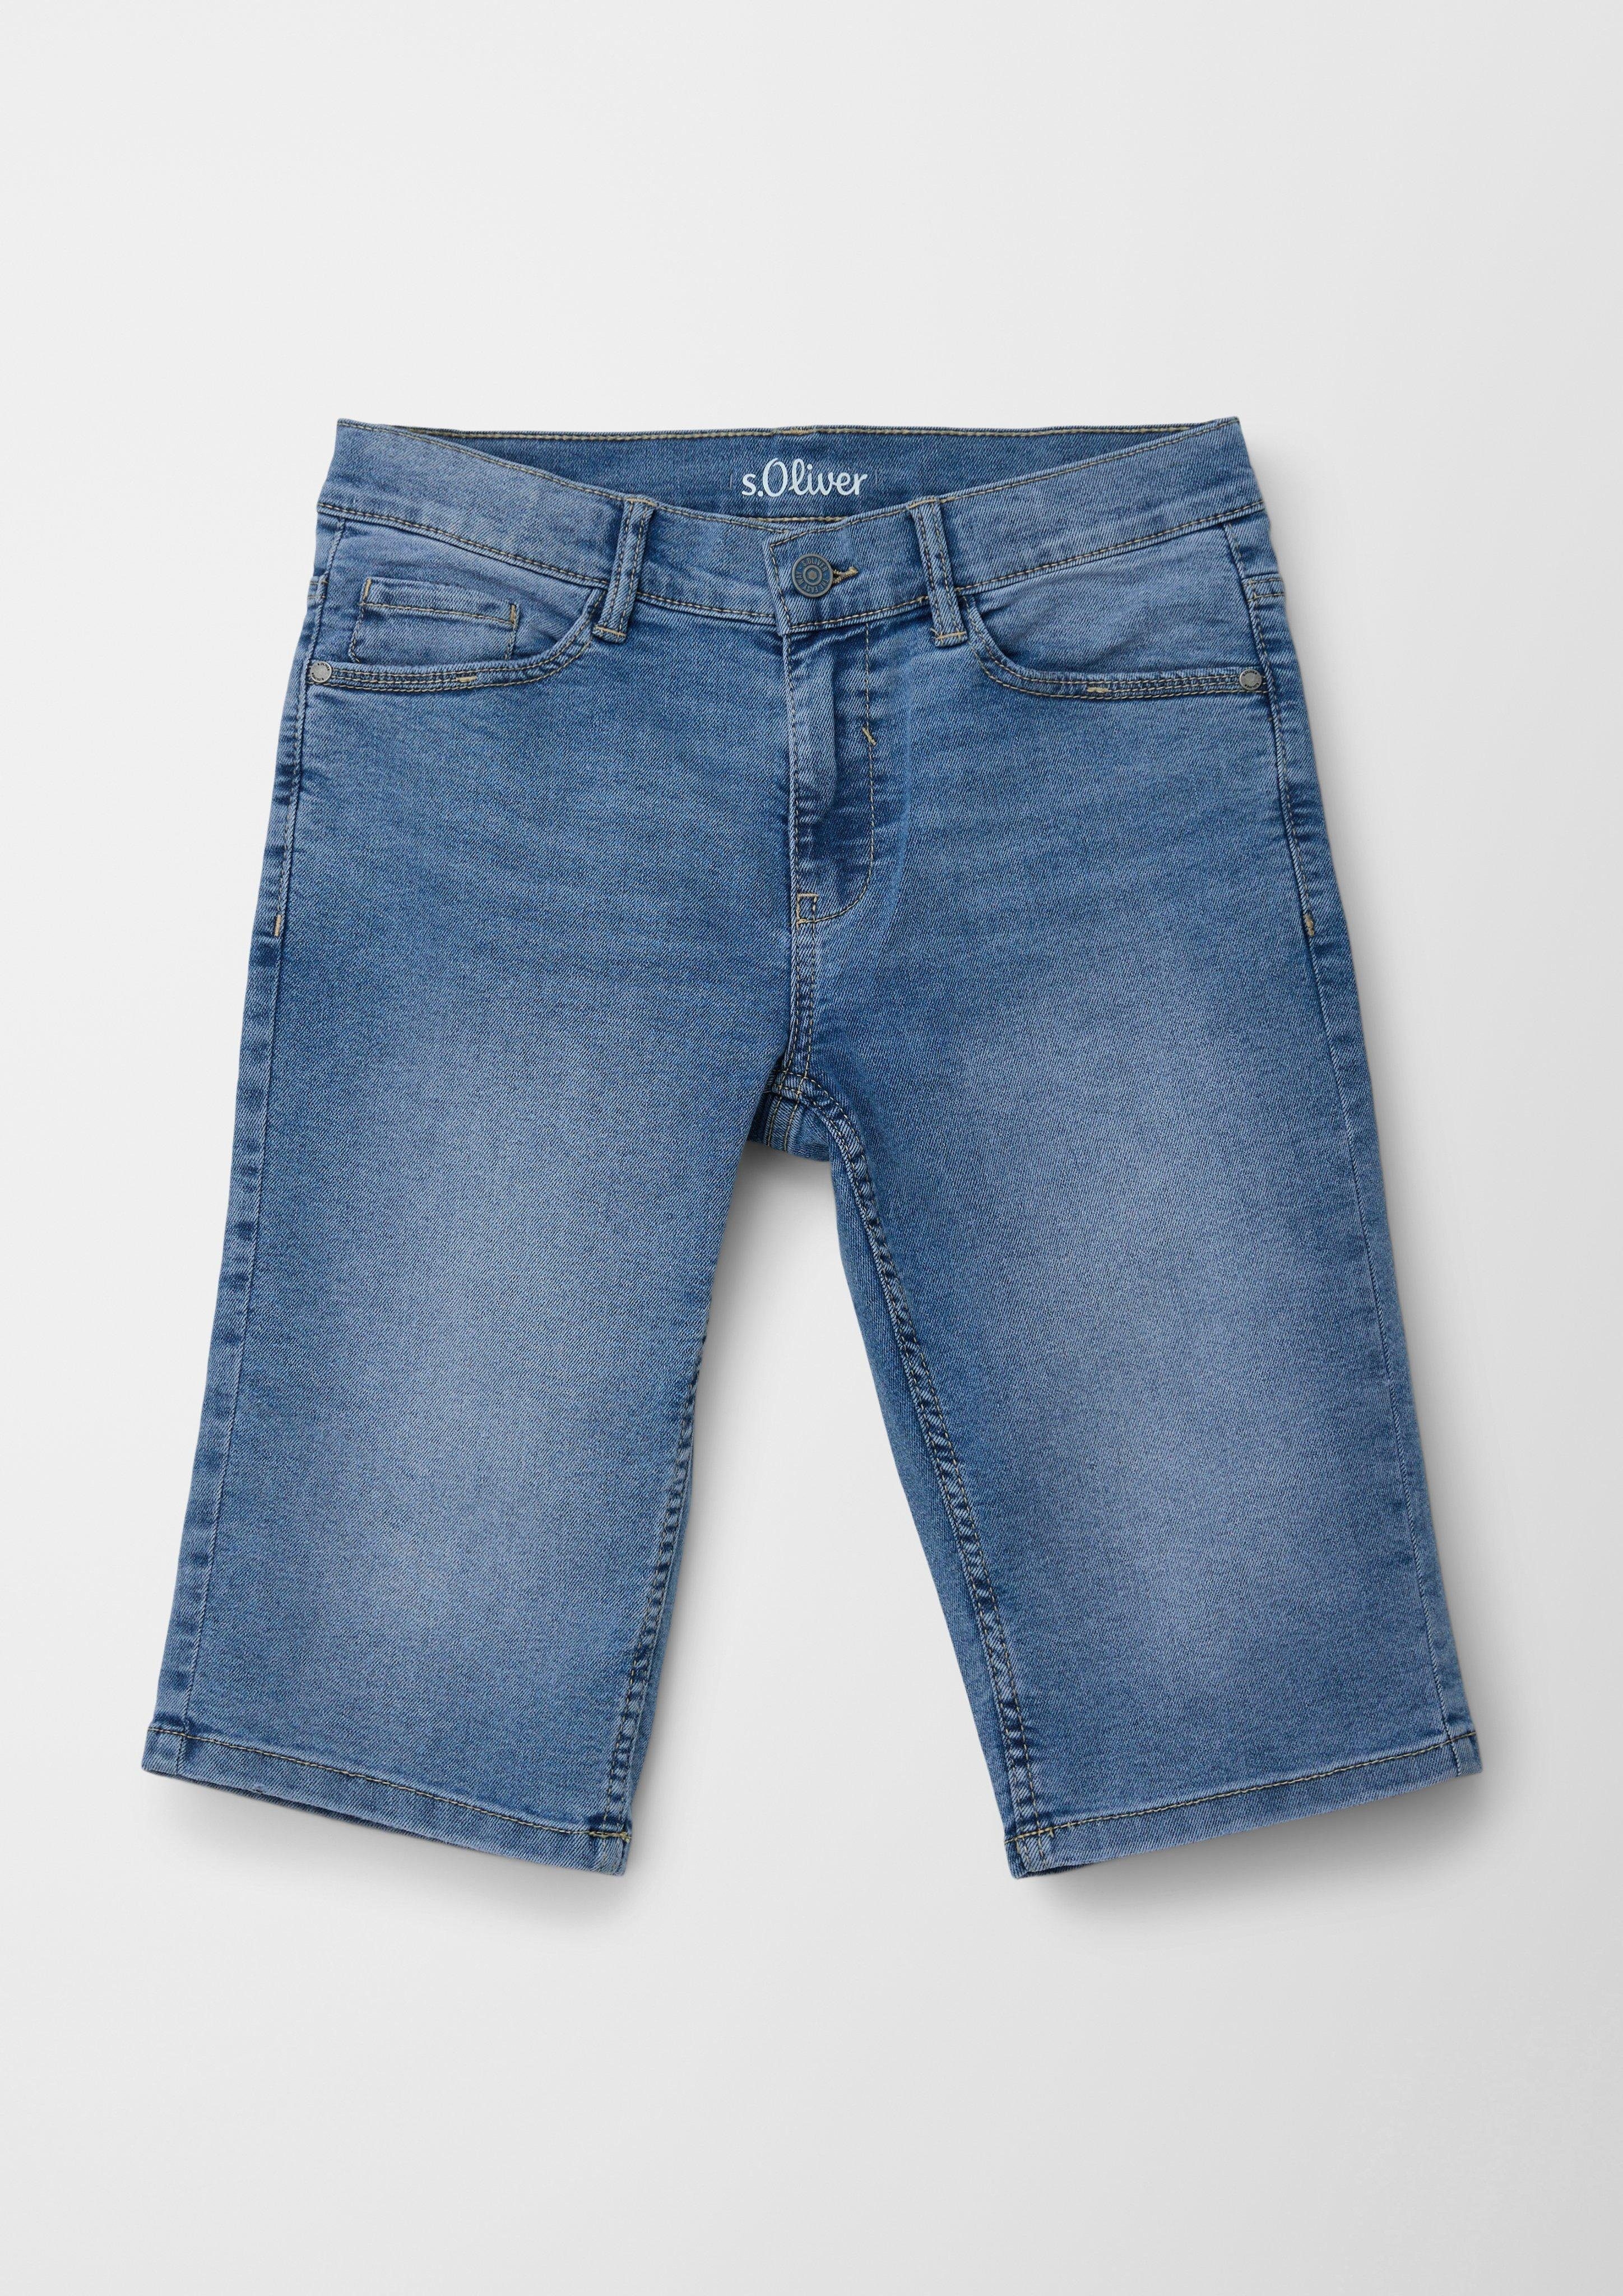 s.Oliver 7/8-Jeans Seattle: Jeans Waschung mit Waschung